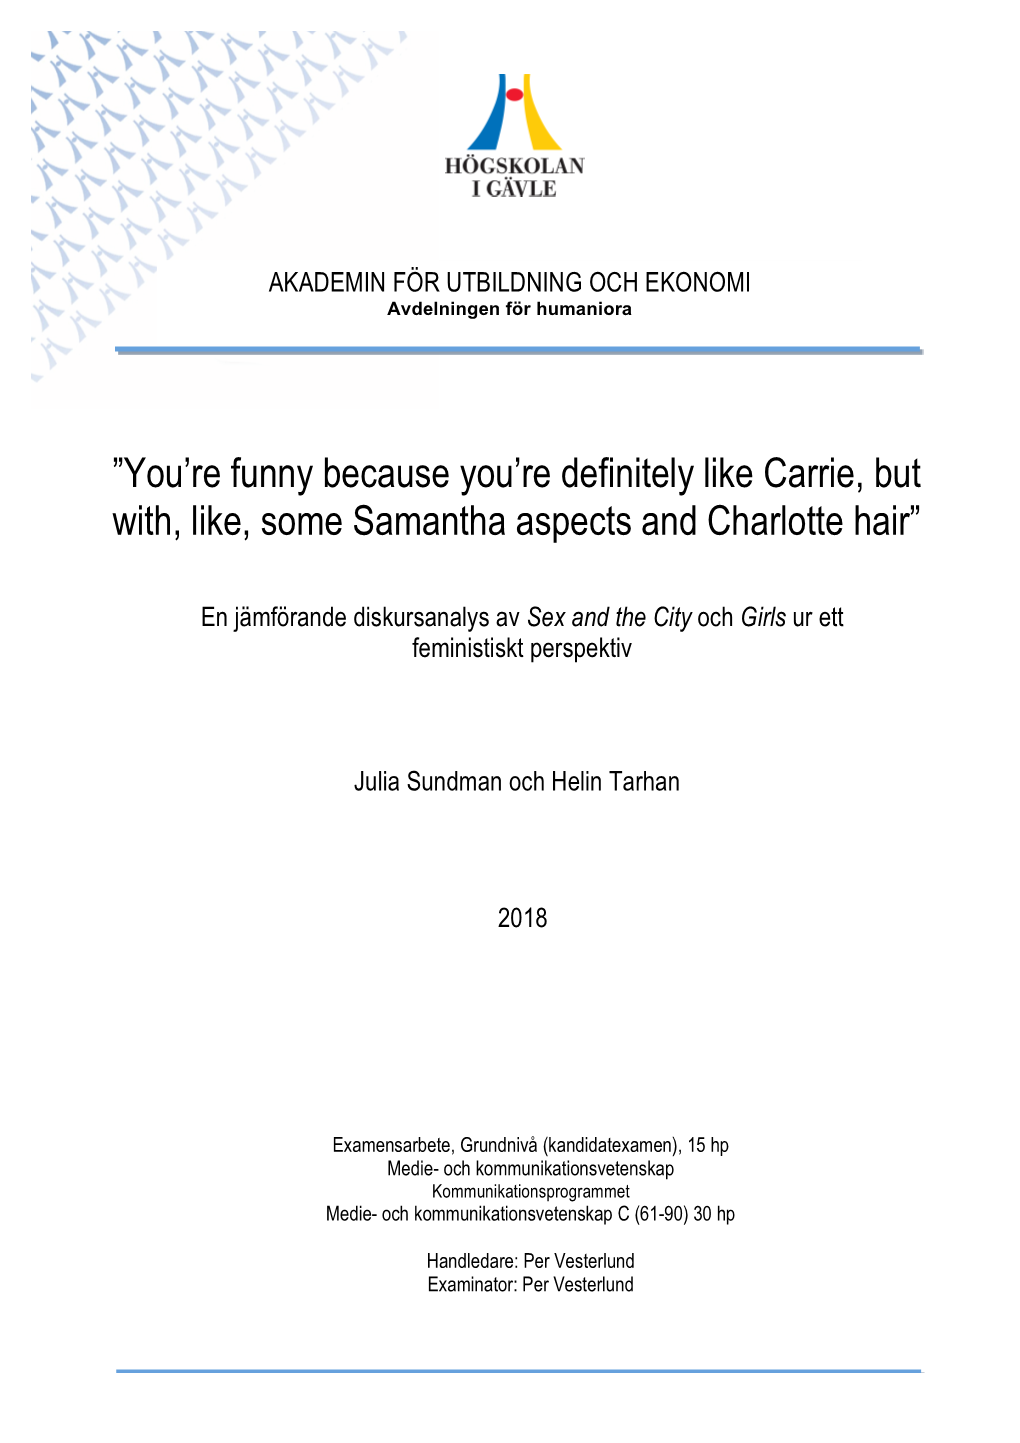 You're Funny Because You're Definitely Like Carrie, but With, Like, Some Samantha Aspects and Charlotte Hair”